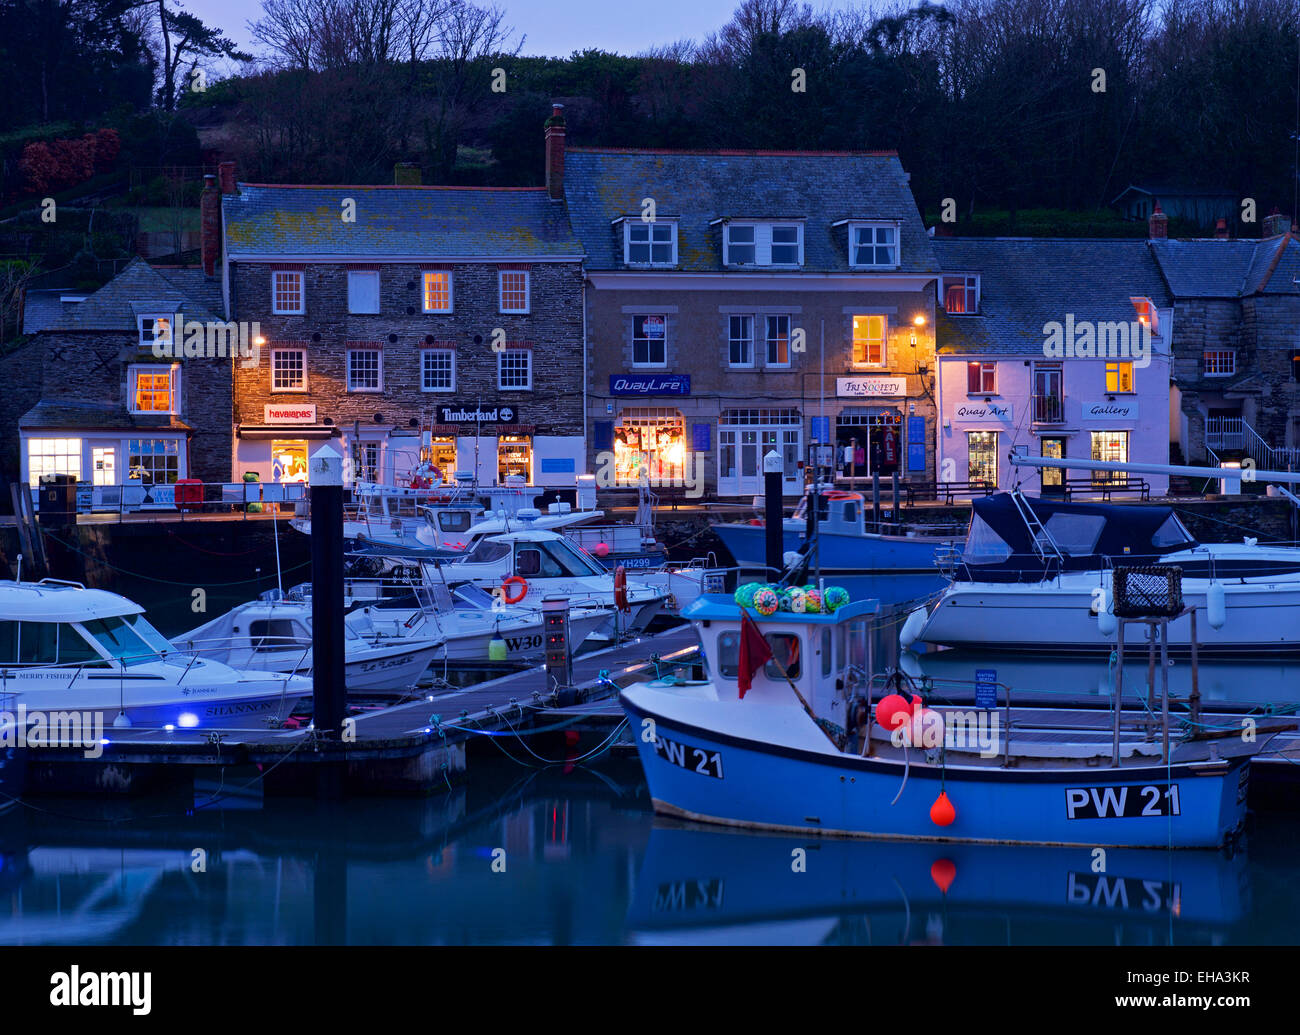 Boats in the harbour at night, Padstow, Cornwall, England UK Stock Photo